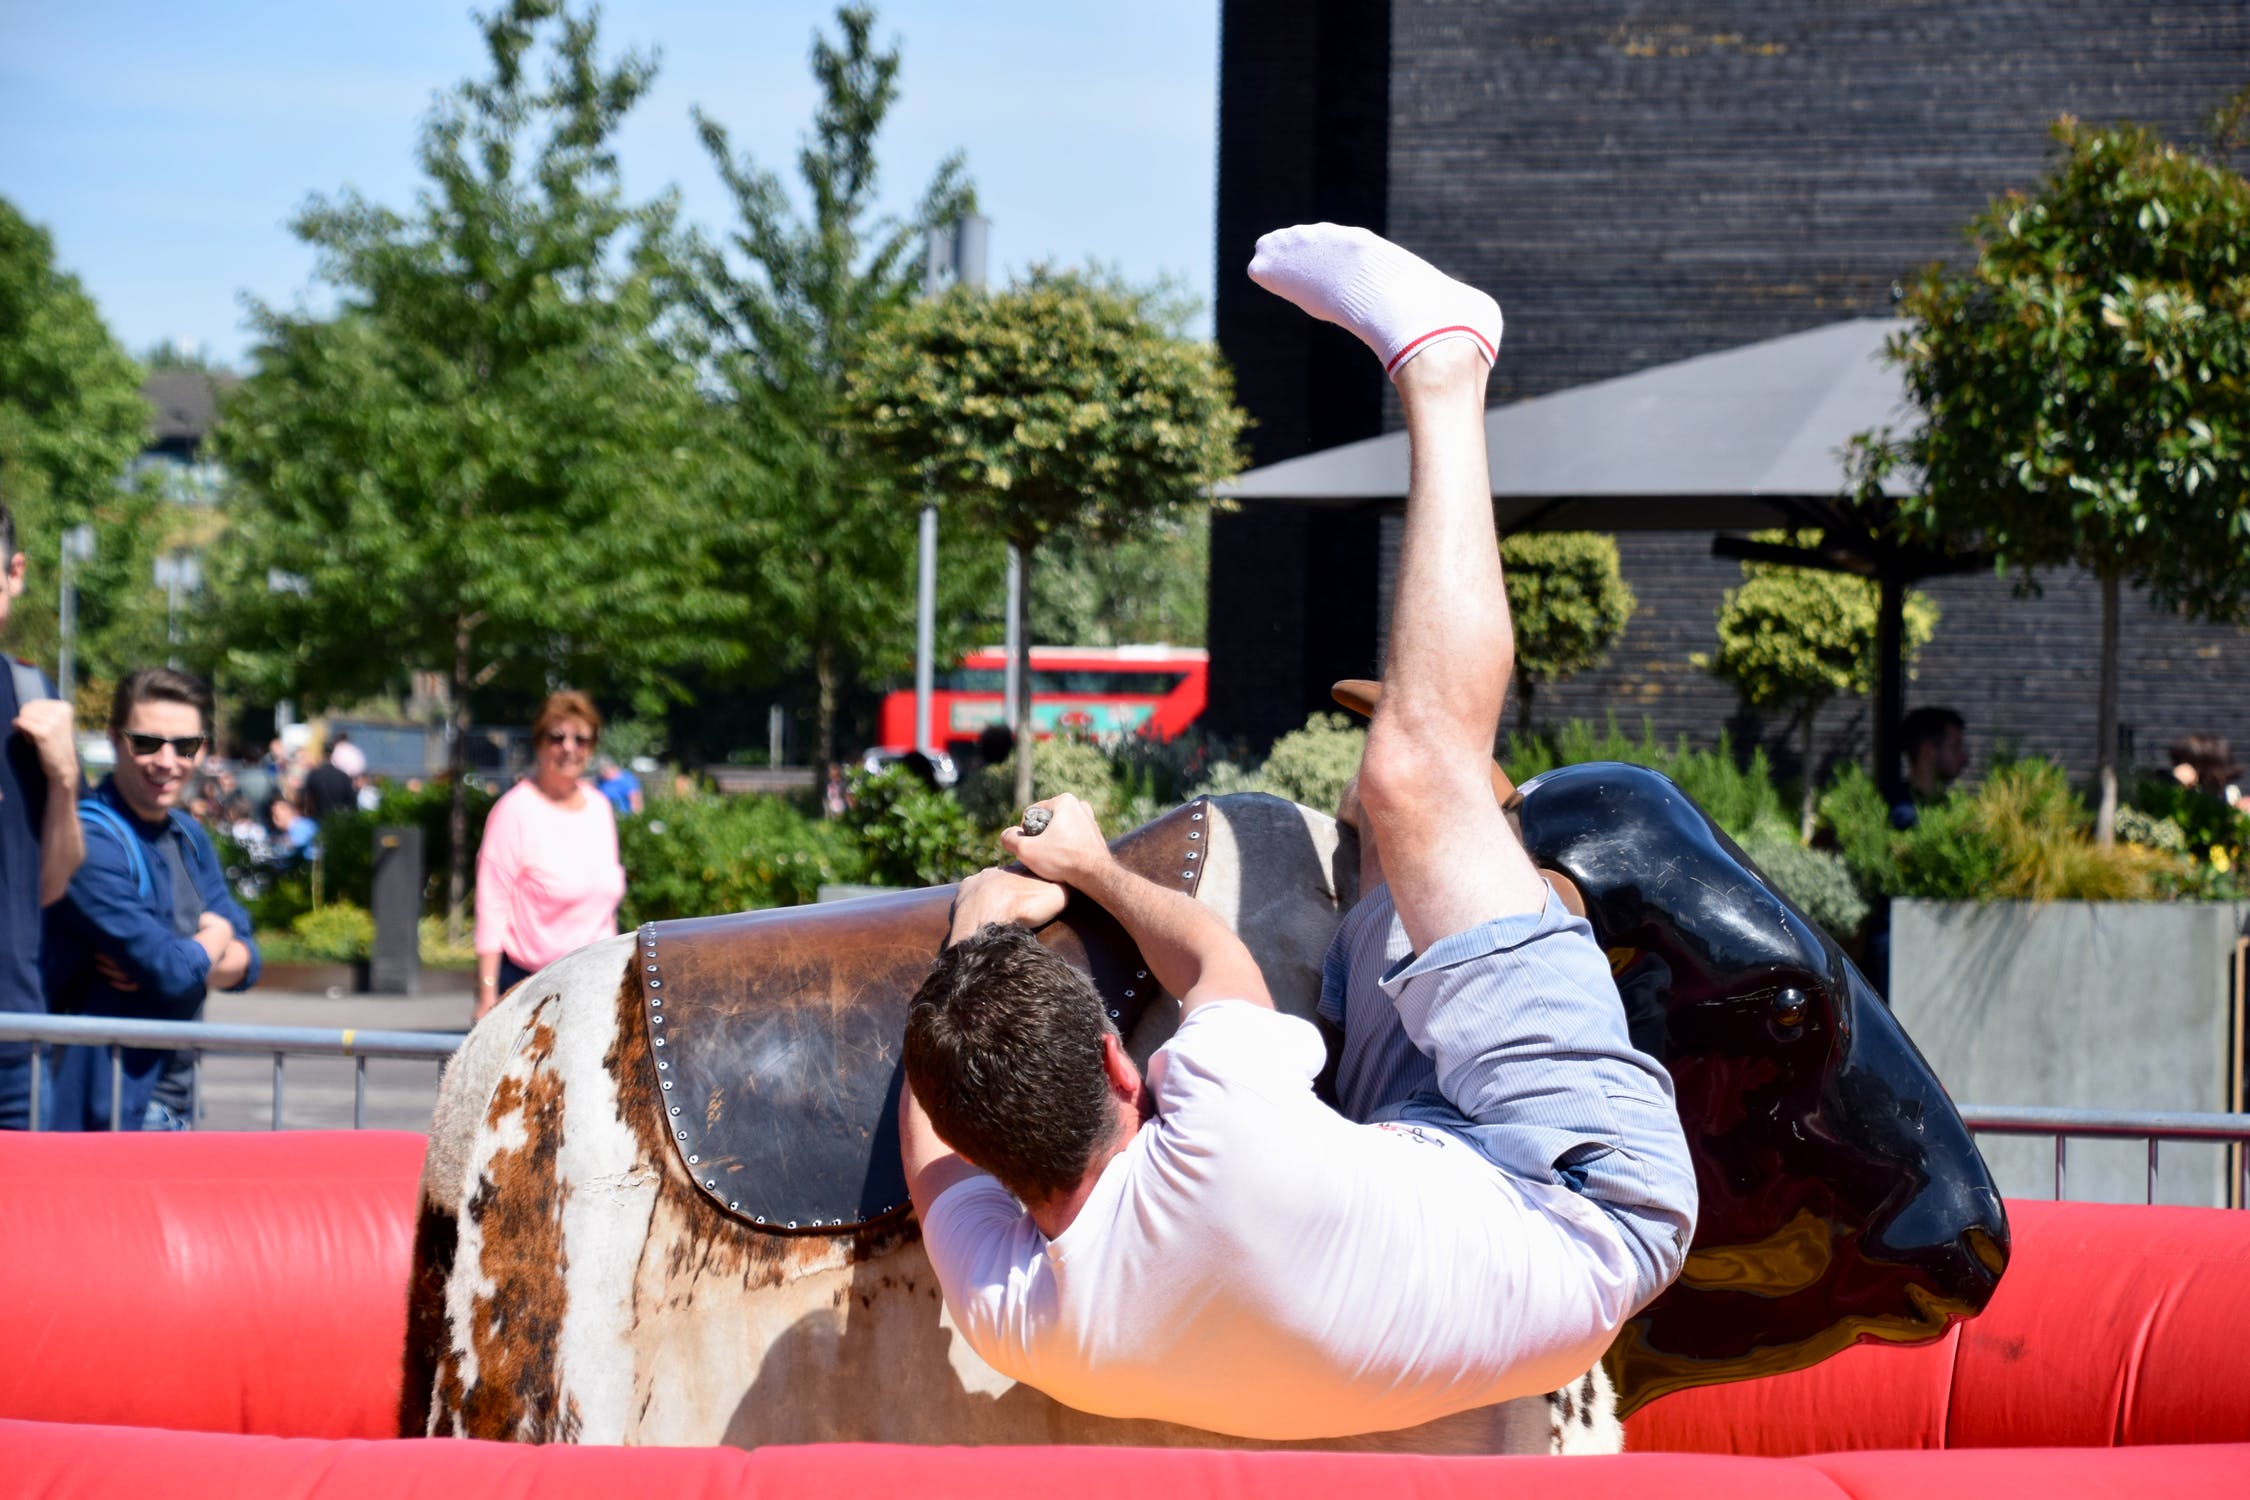 Yeehaw! Get Started With Adrenaline Pumping Mechanical Bull Riding